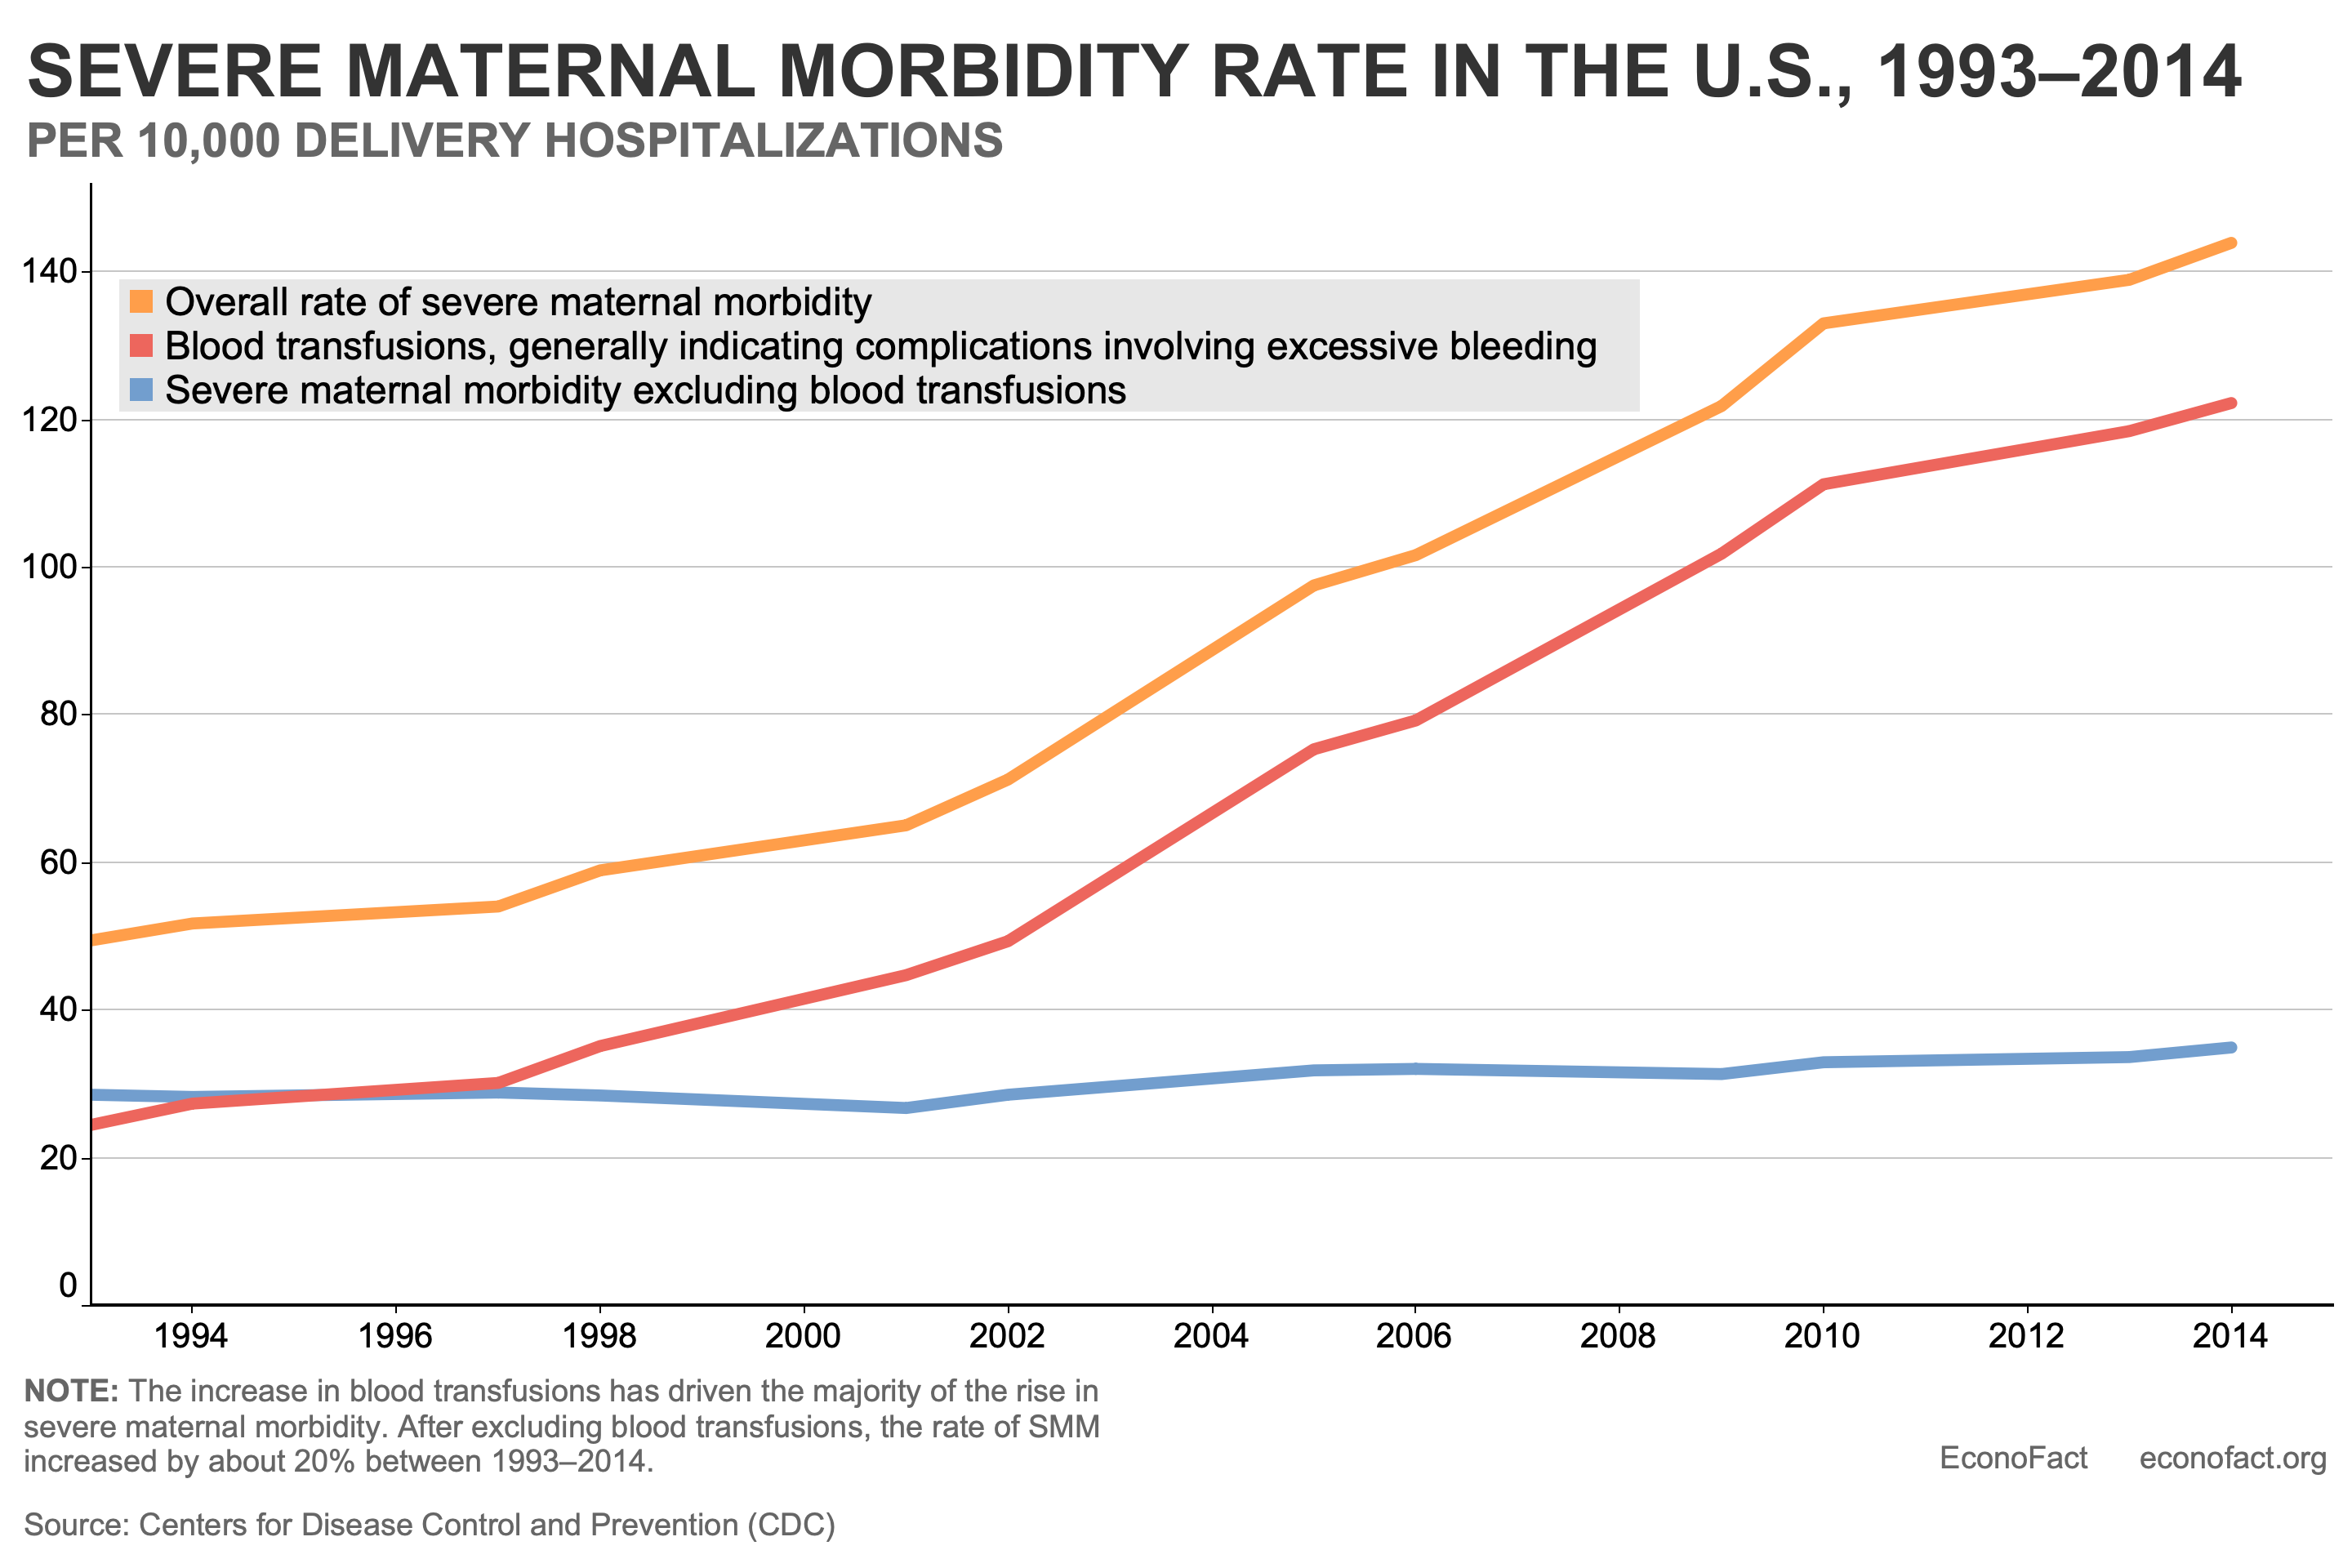 Graph of severe maternal morbidity in the U.S. from 1993–2014. Displays the trend of an increasing amount of blood transfusions, and the discrepancy between the morbidity rate with and without blood transfusions.